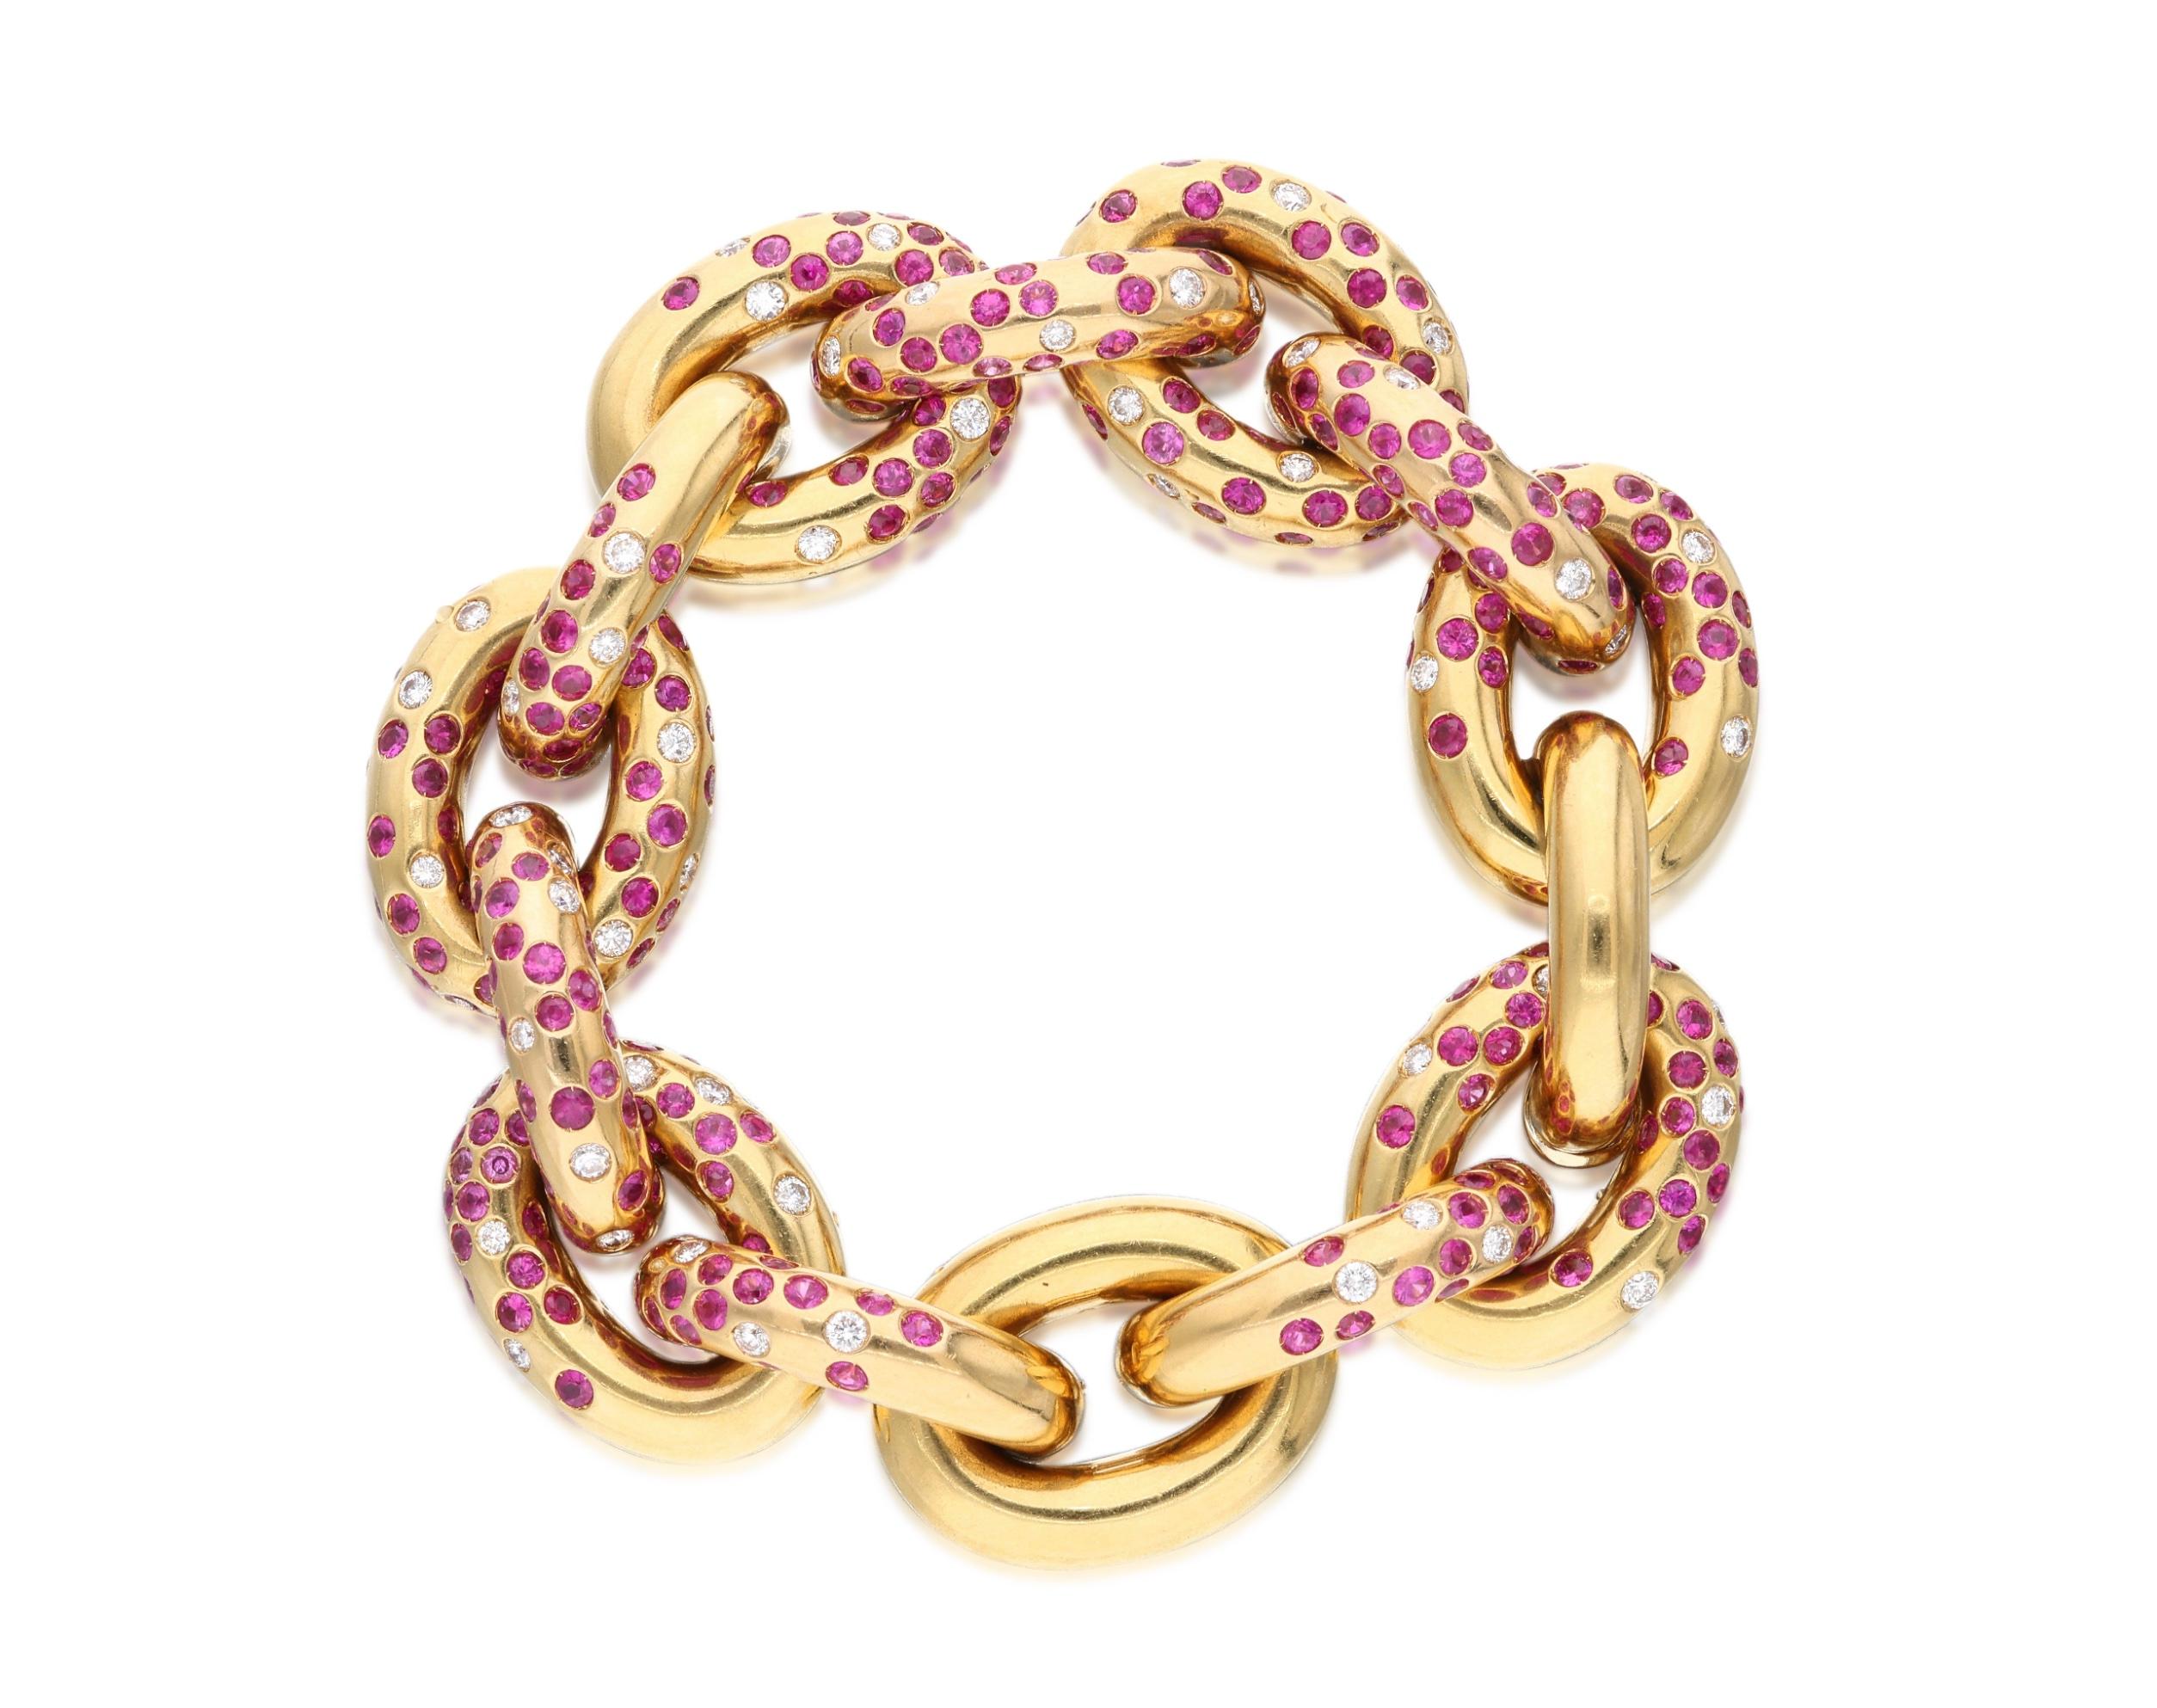 Cantamessa 18 karat yellow gold oval link bracelet, accented by round-cut rubies and diamonds. The diamonds weigh a total of approximately 2.30 carats, and the rubies weigh a total of approximately 10 carats. Marked: Cantamessa. Made in Italy. Total